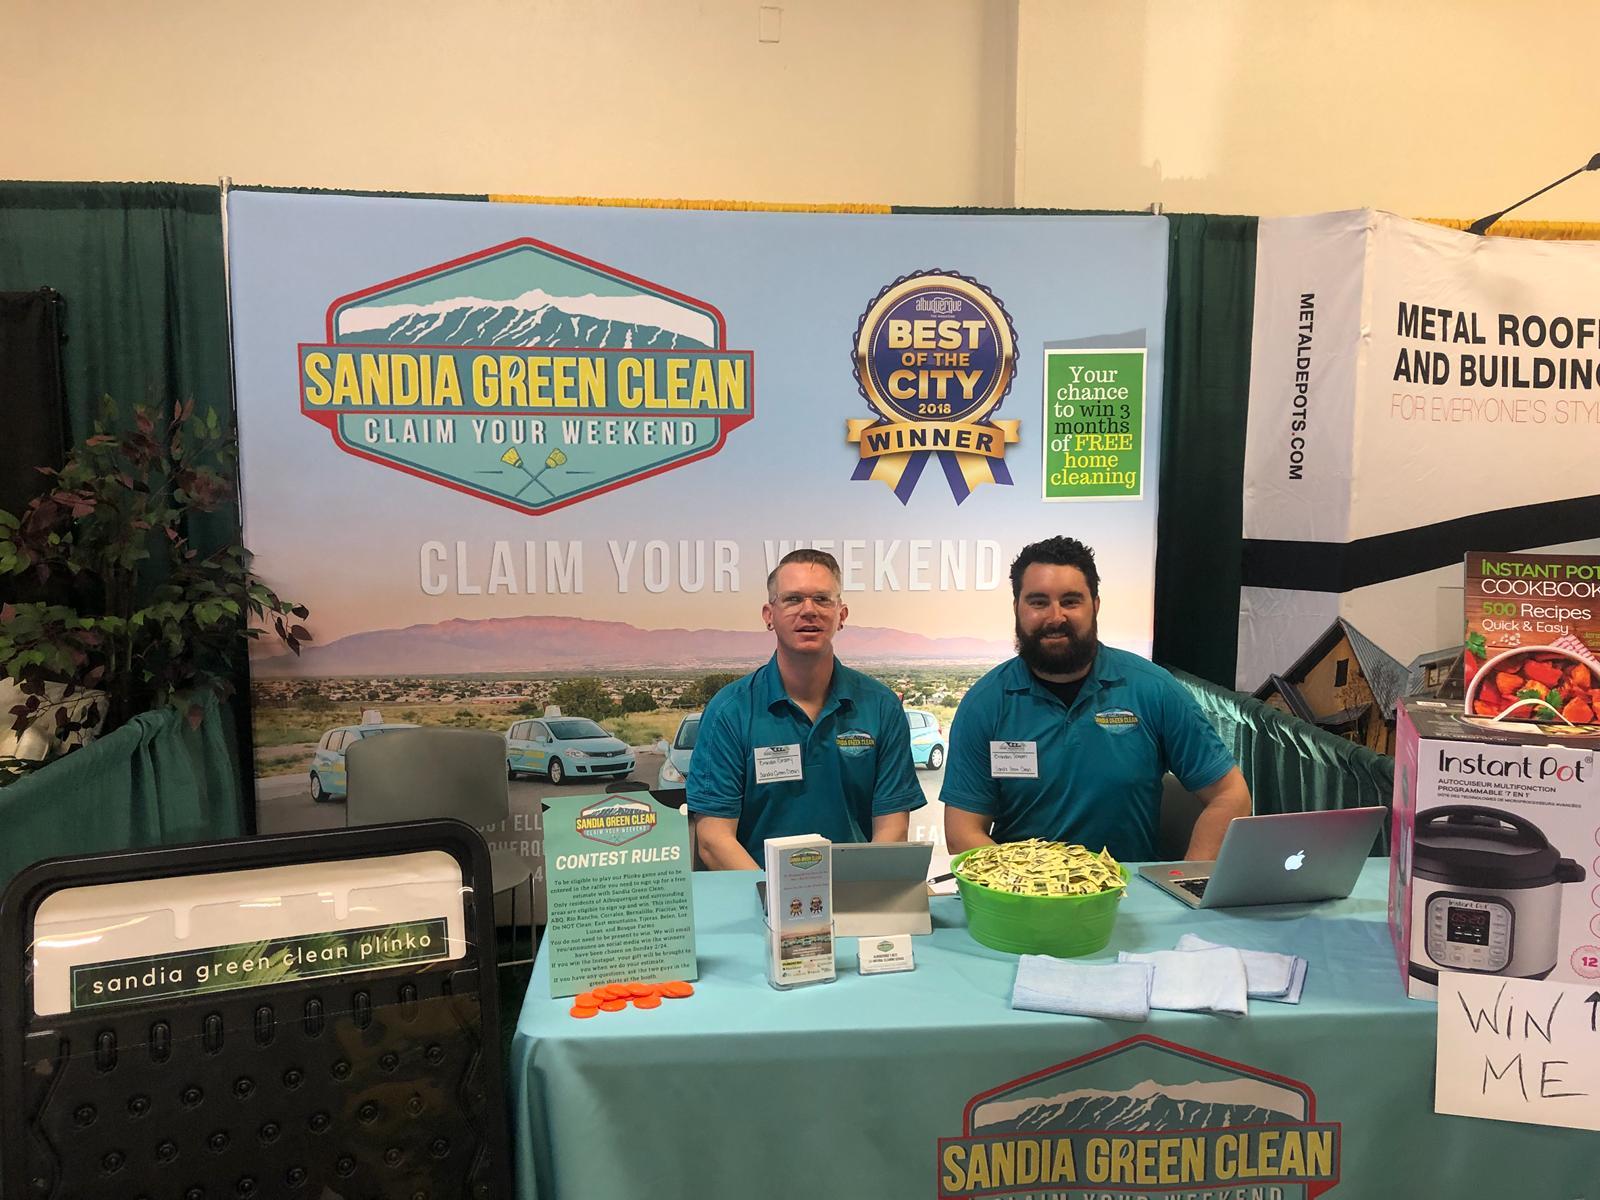 Albuquerque Home Remodeling & Lifestyle Show - Sandia Green Clean